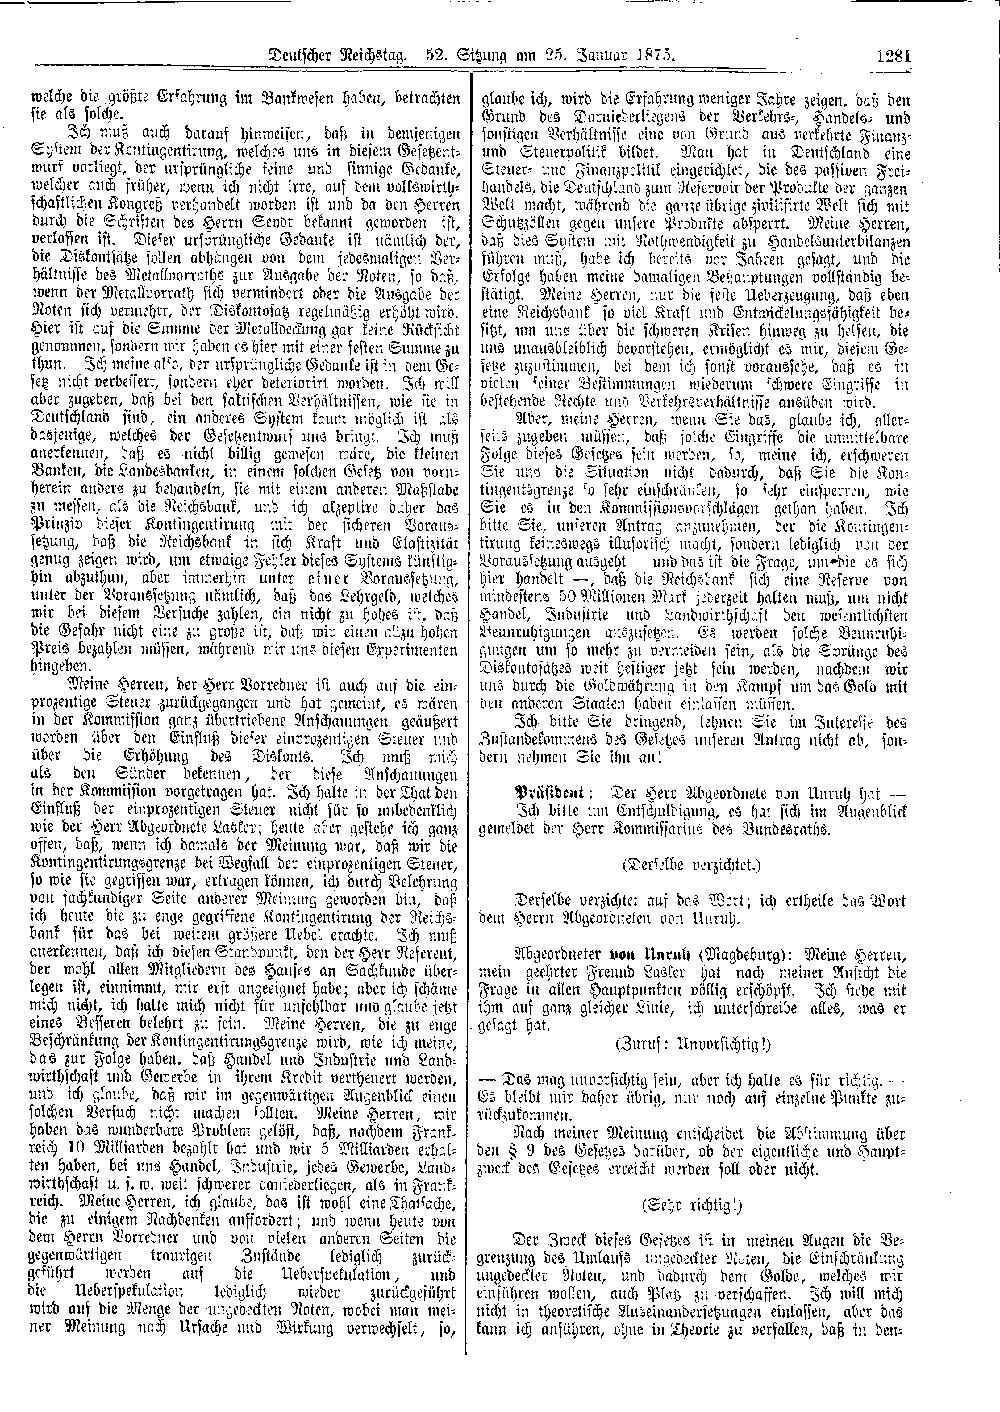 Scan of page 1281